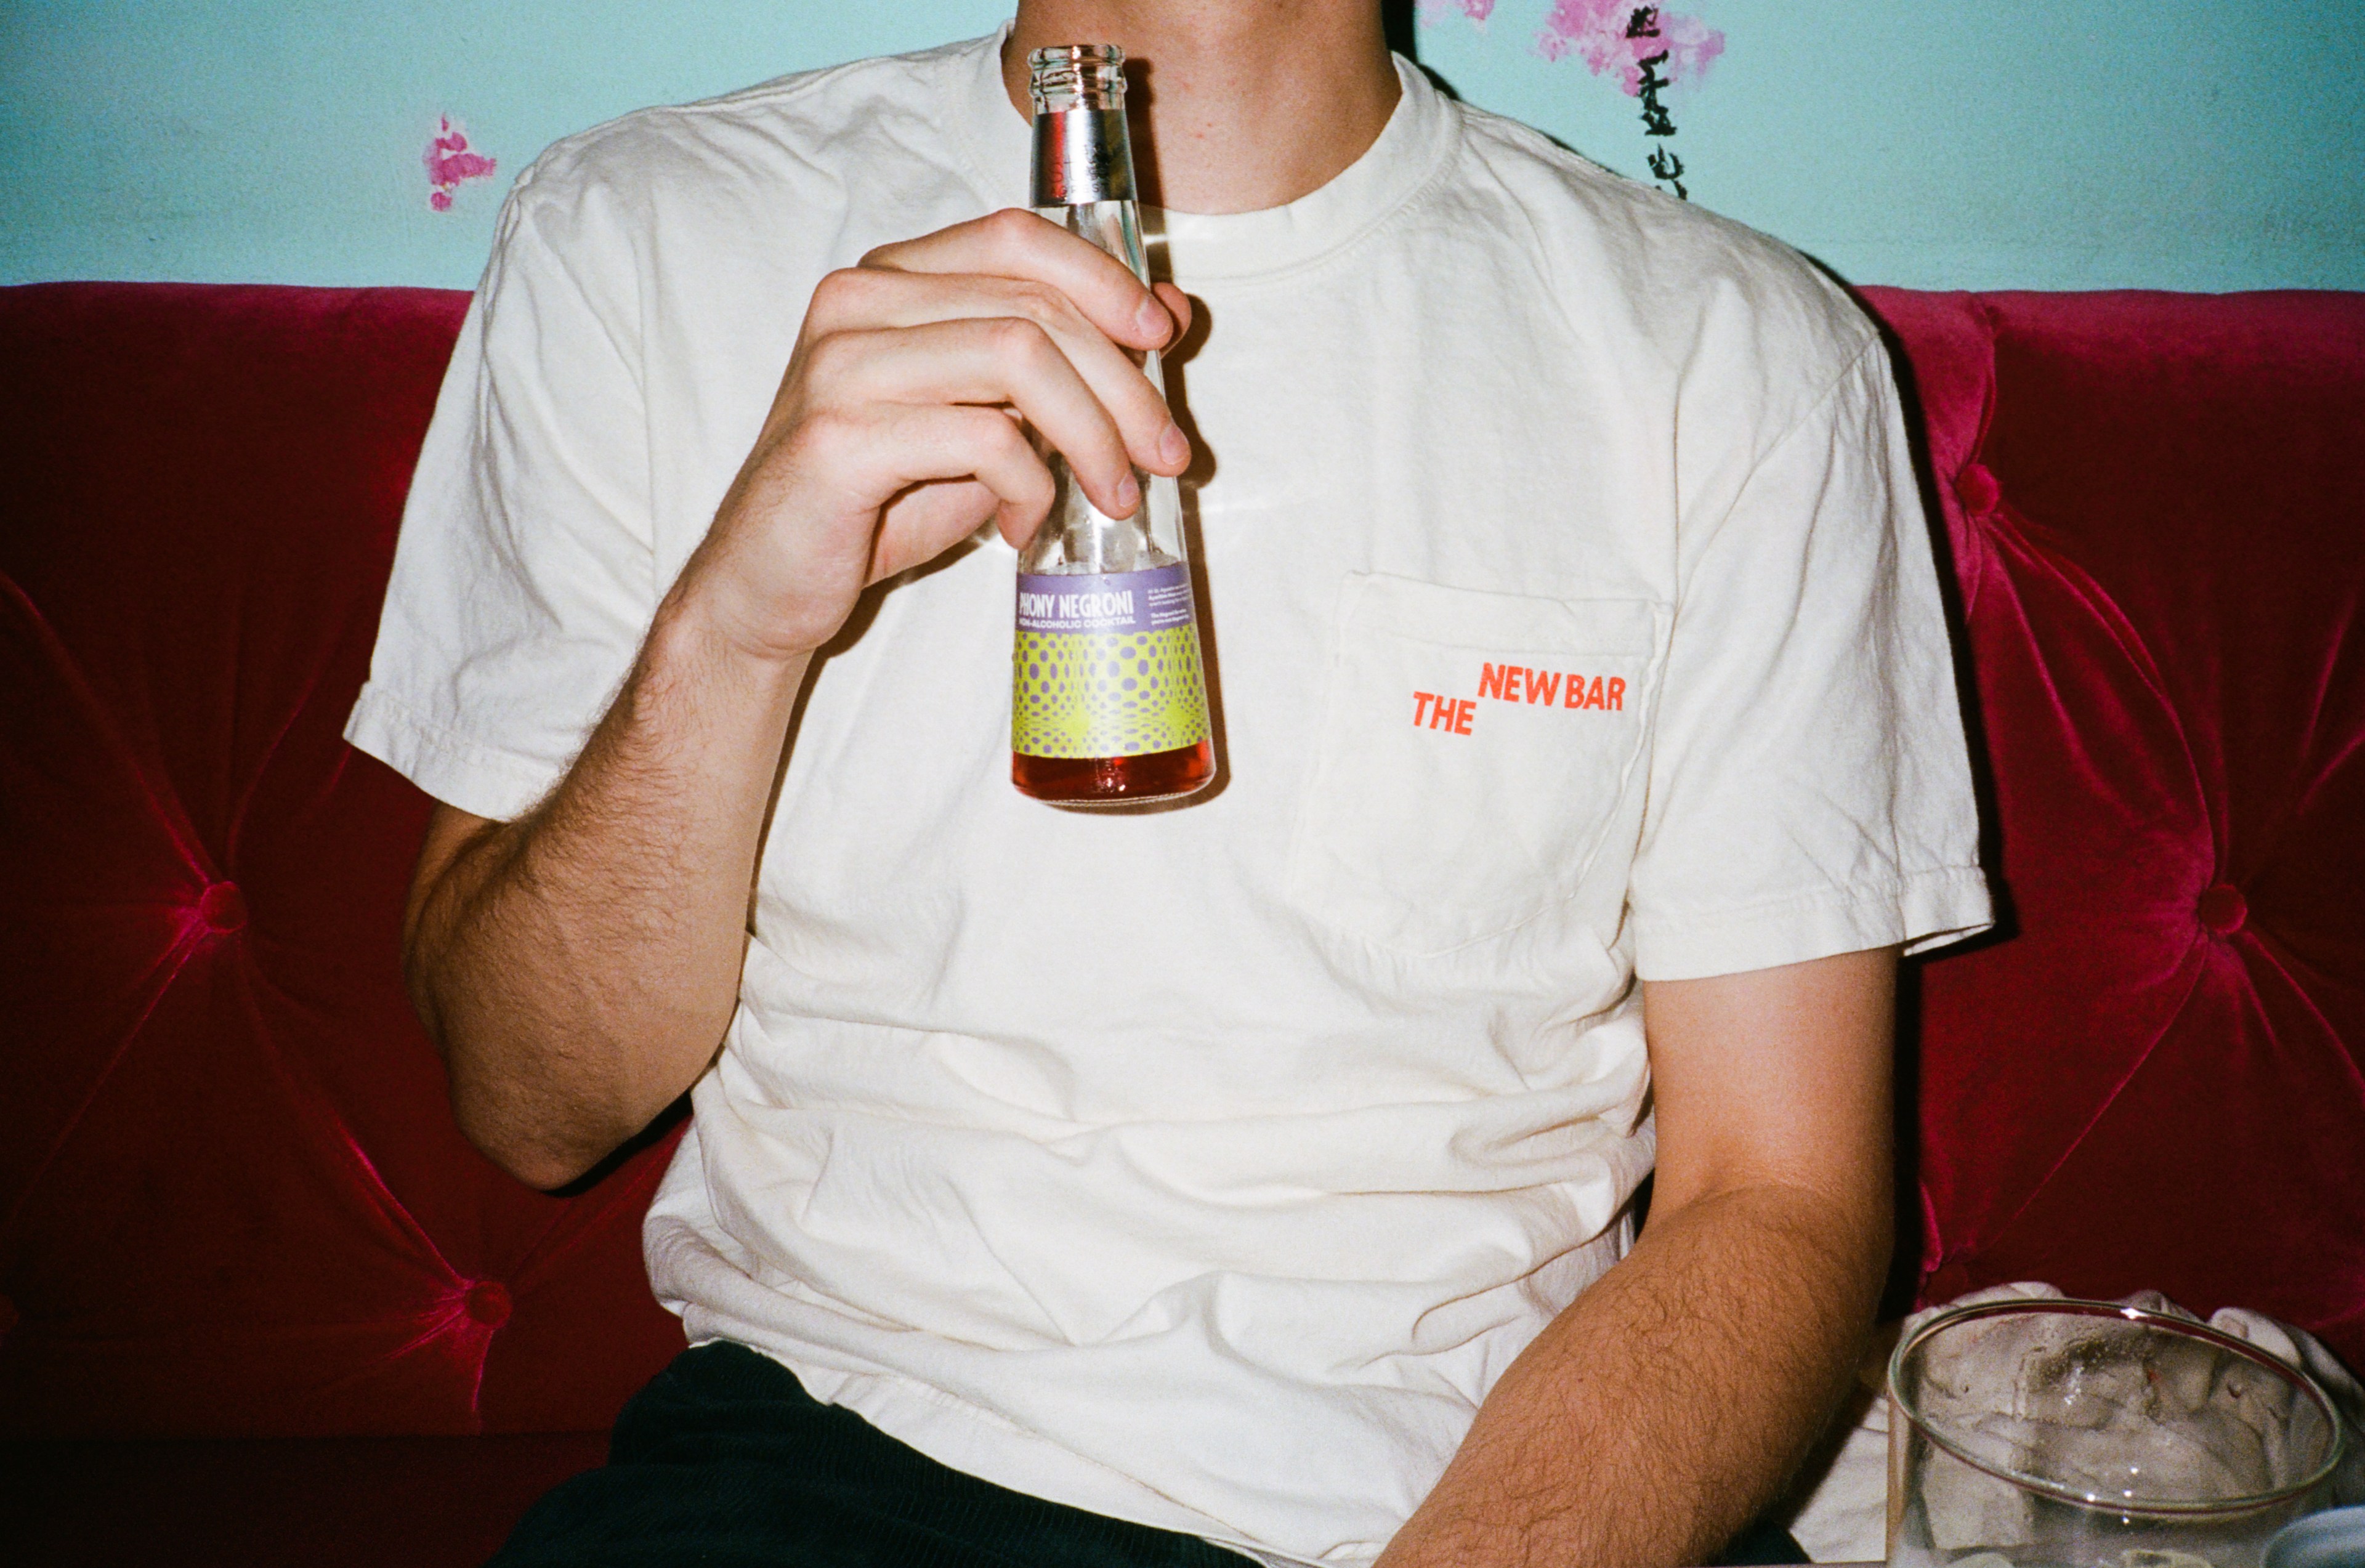 A person in a white T-shirt with the word &quot;THE NEW BAR&quot; holds a bottled drink with text &quot;HONEY NEGRONI&quot; on a red sofa.